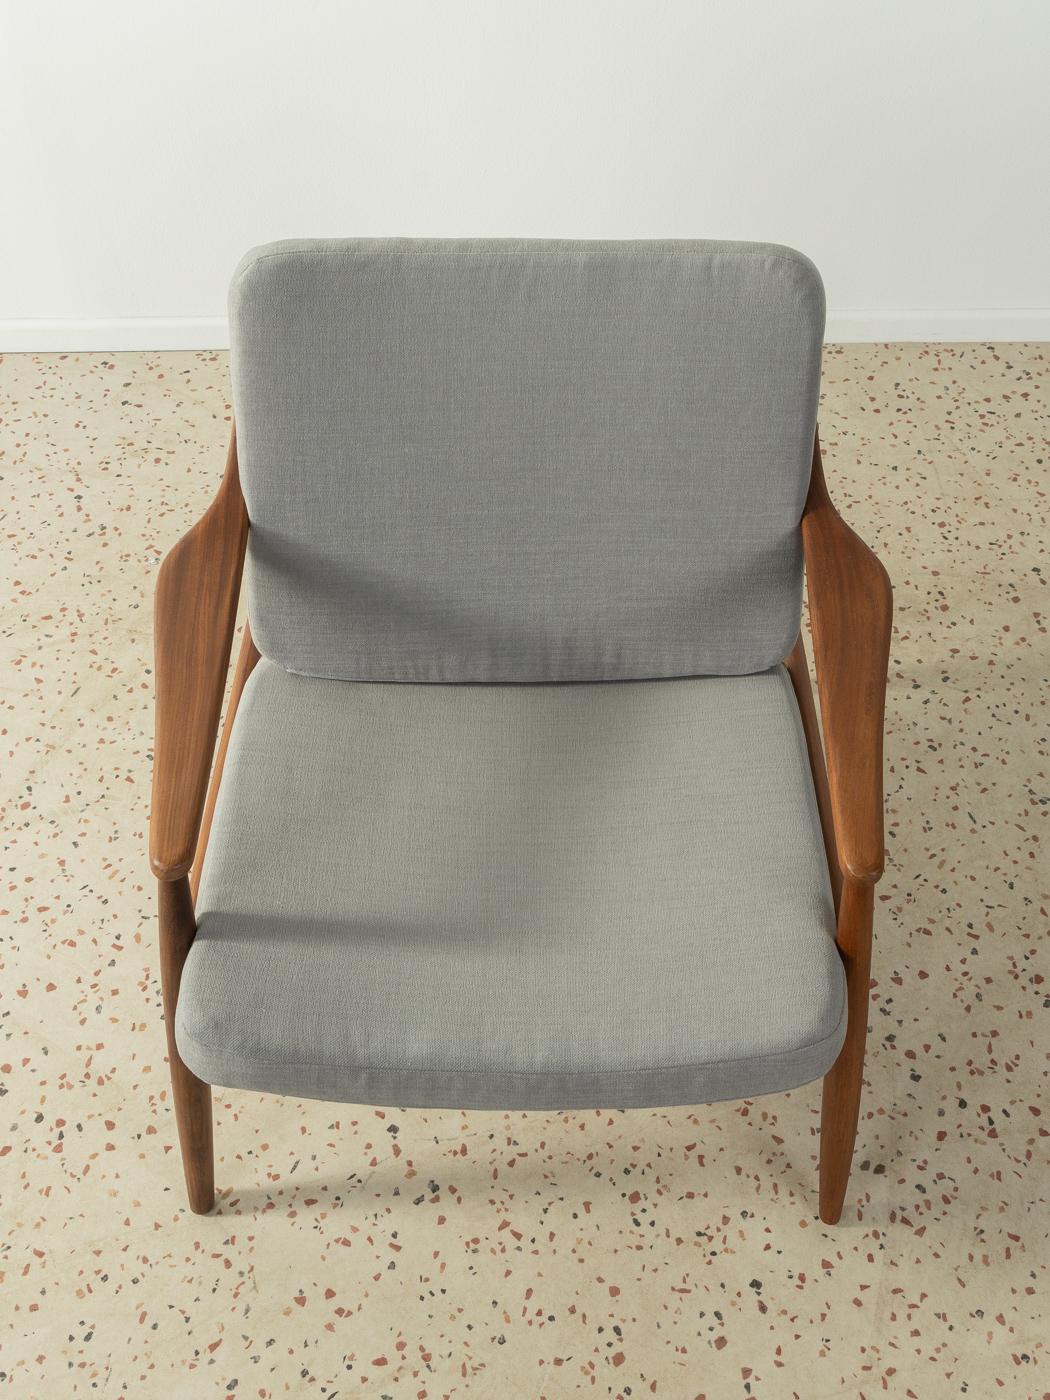 Upholstery Armchair Type 400 by Hartmut Lohmeyer for Wilkhahn in 1950s For Sale